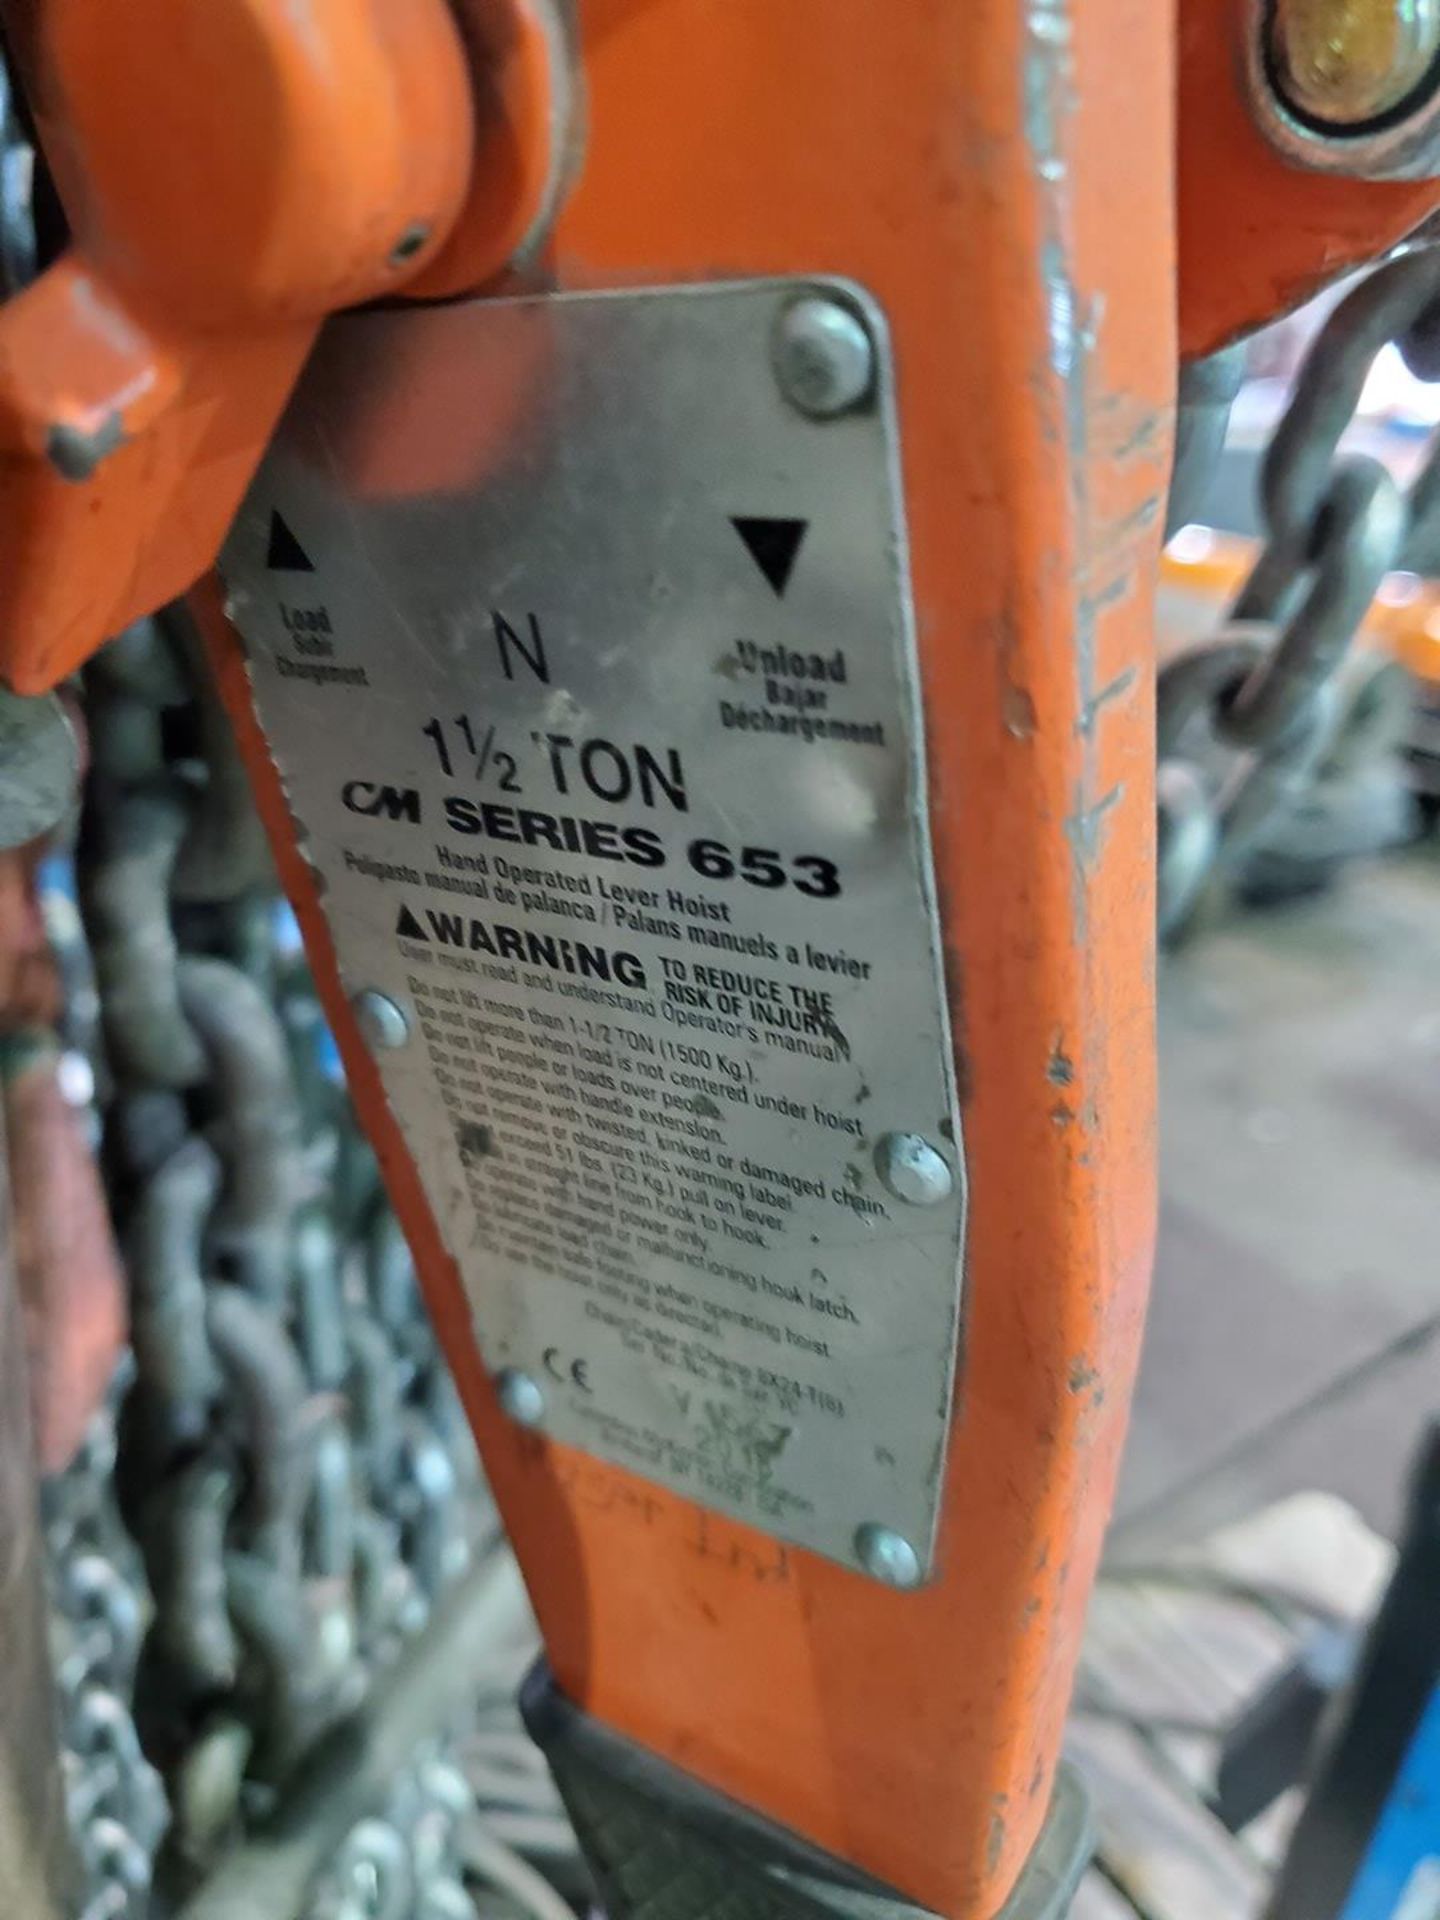 CM Series 653 (3) Hand Lever Hoists W/ Assorted Lifting Chains & Shackles - Image 3 of 7